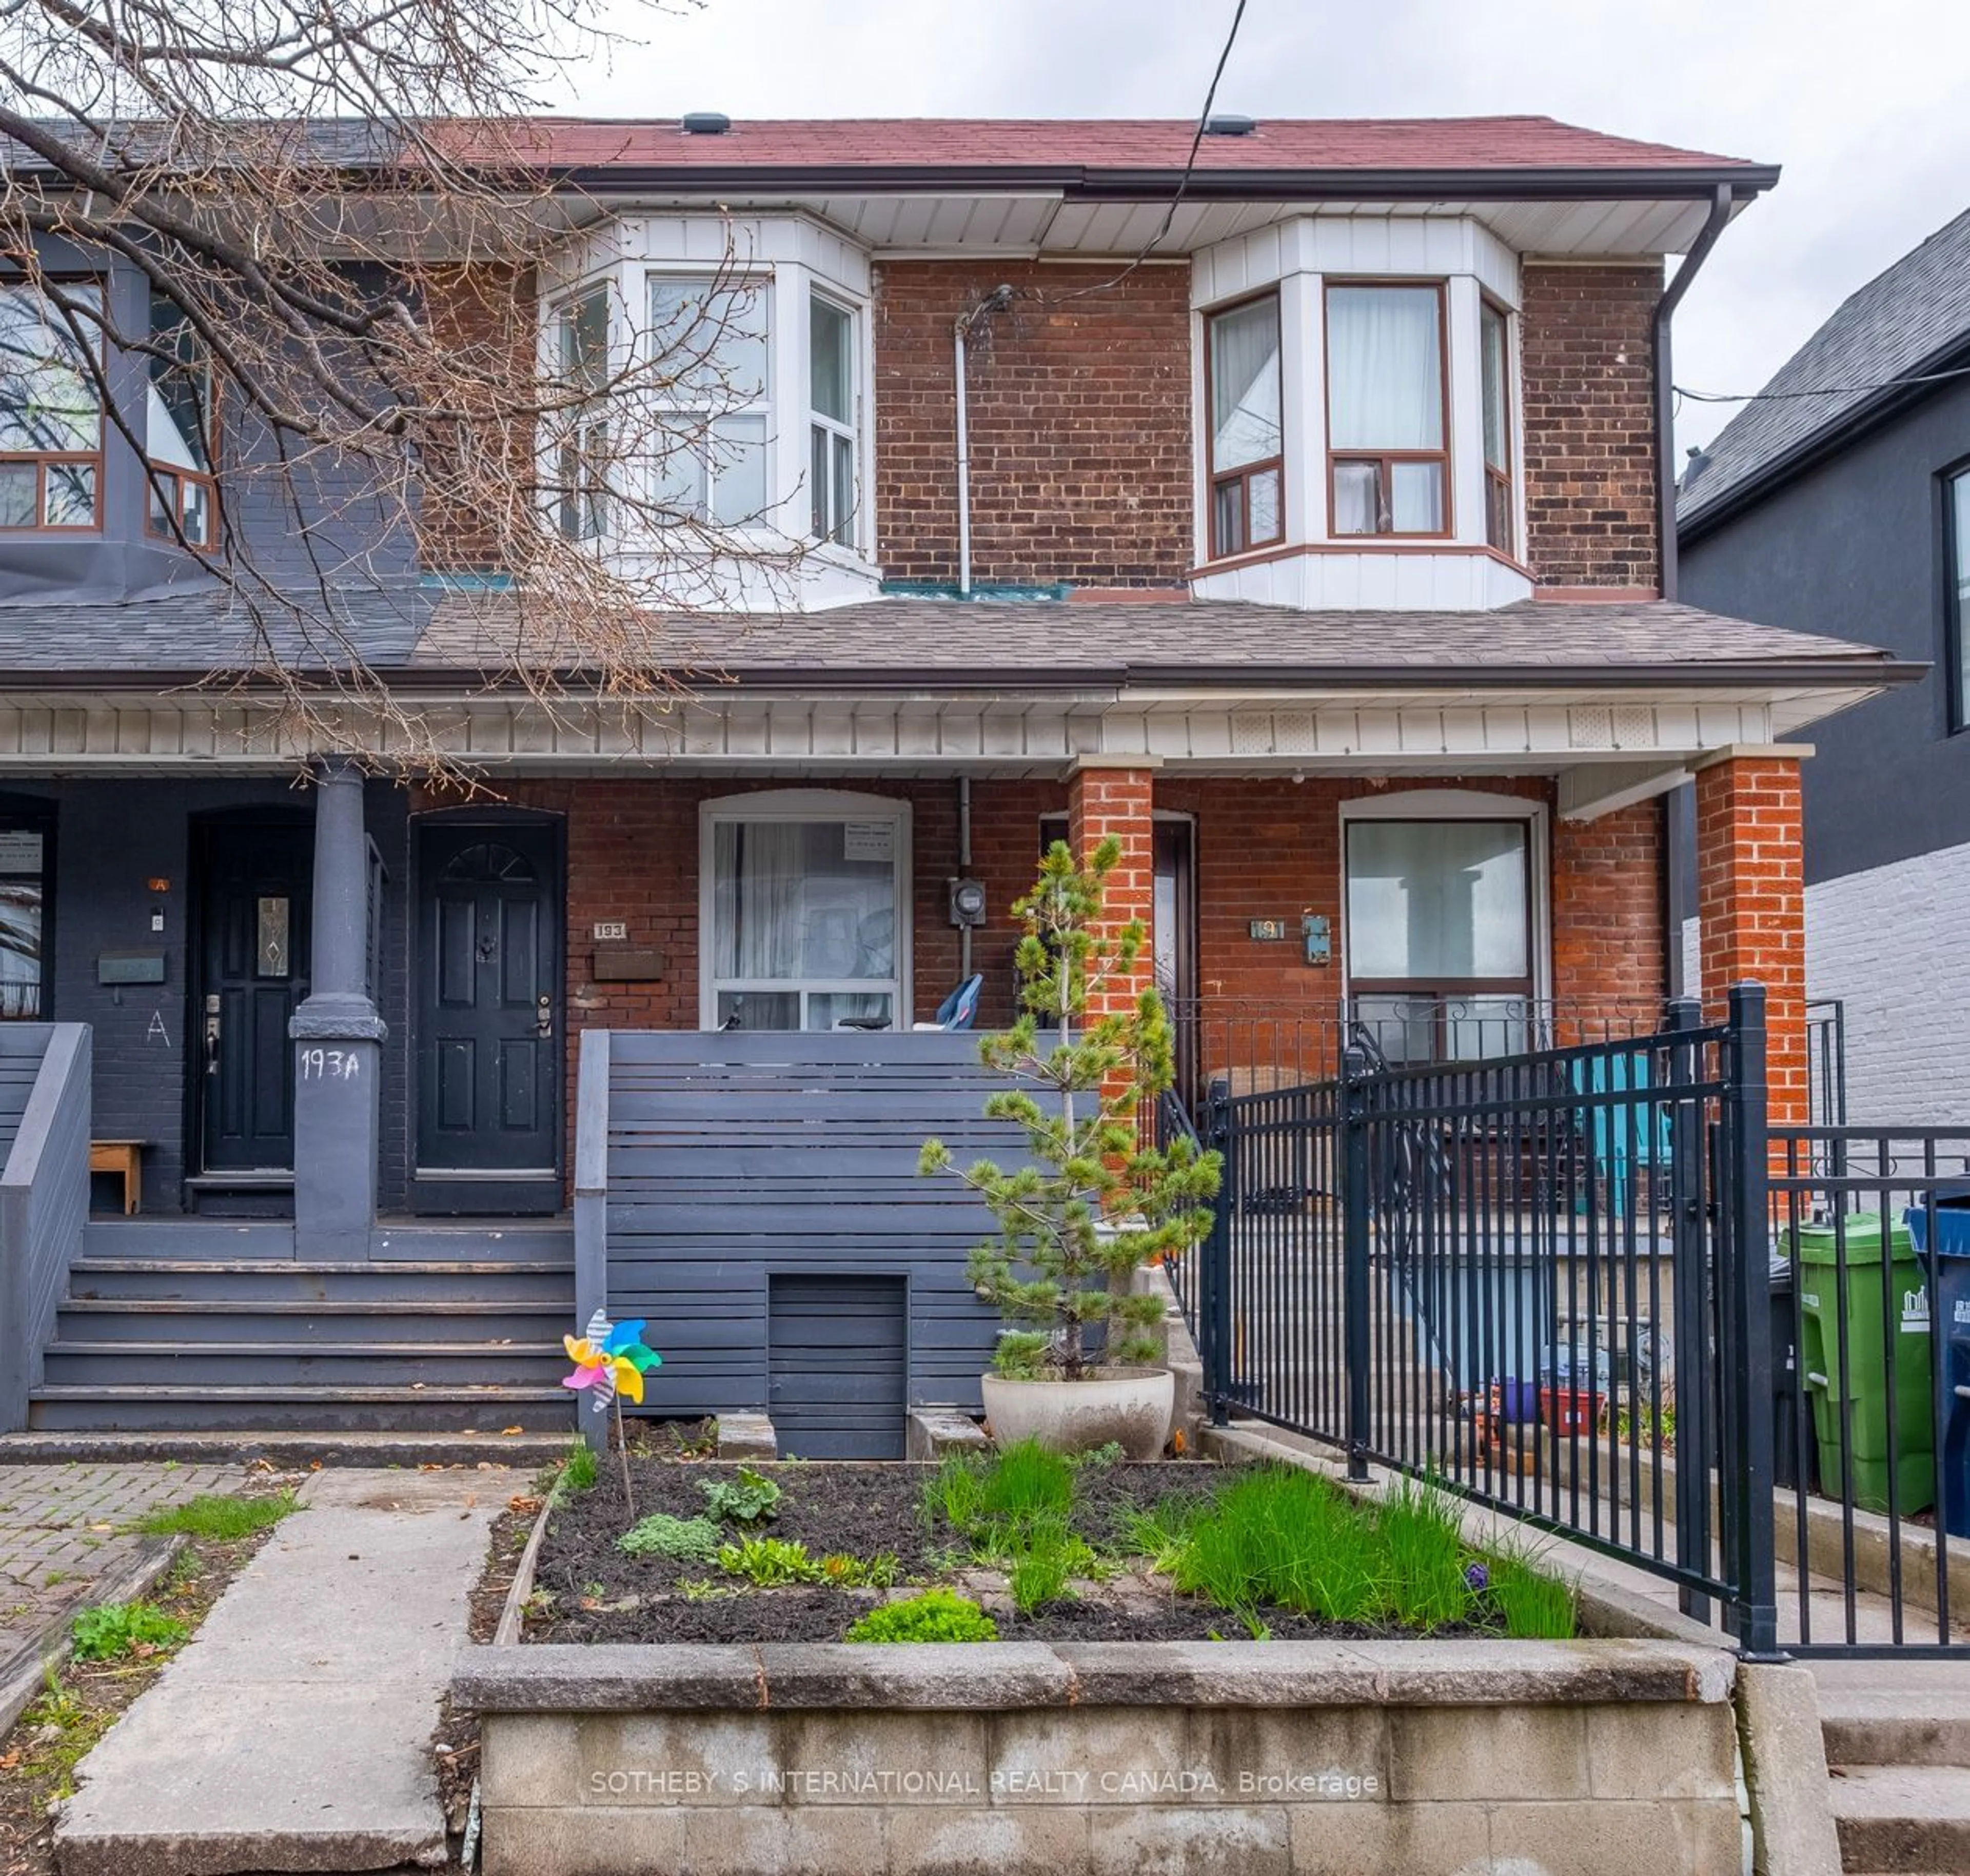 Home with brick exterior material for 193 Emerson Ave, Toronto Ontario M6H 3T7